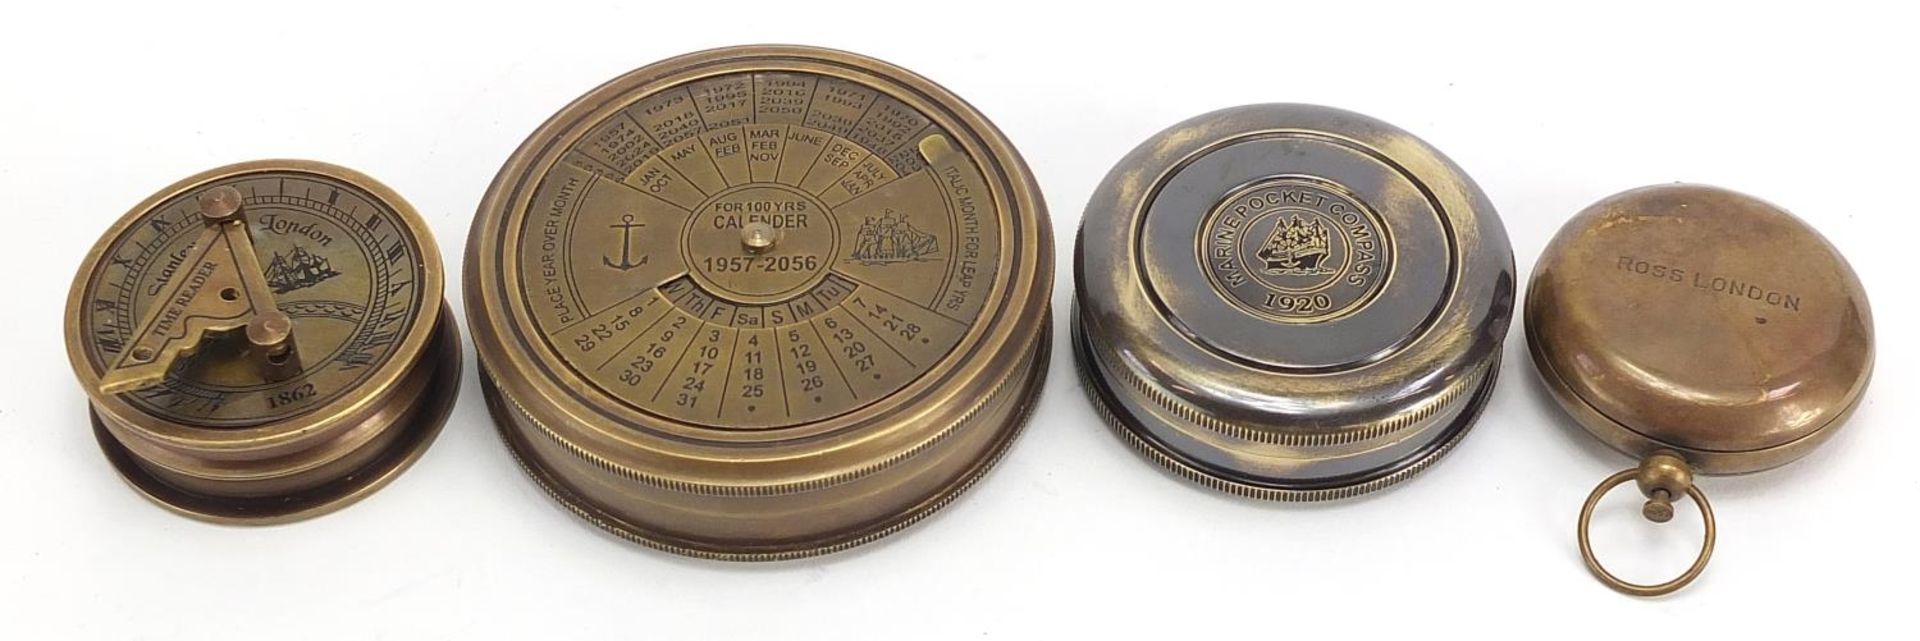 Four brass nautical interest compasses and sun dials, the largest 7.5cm in diameter - Image 4 of 5